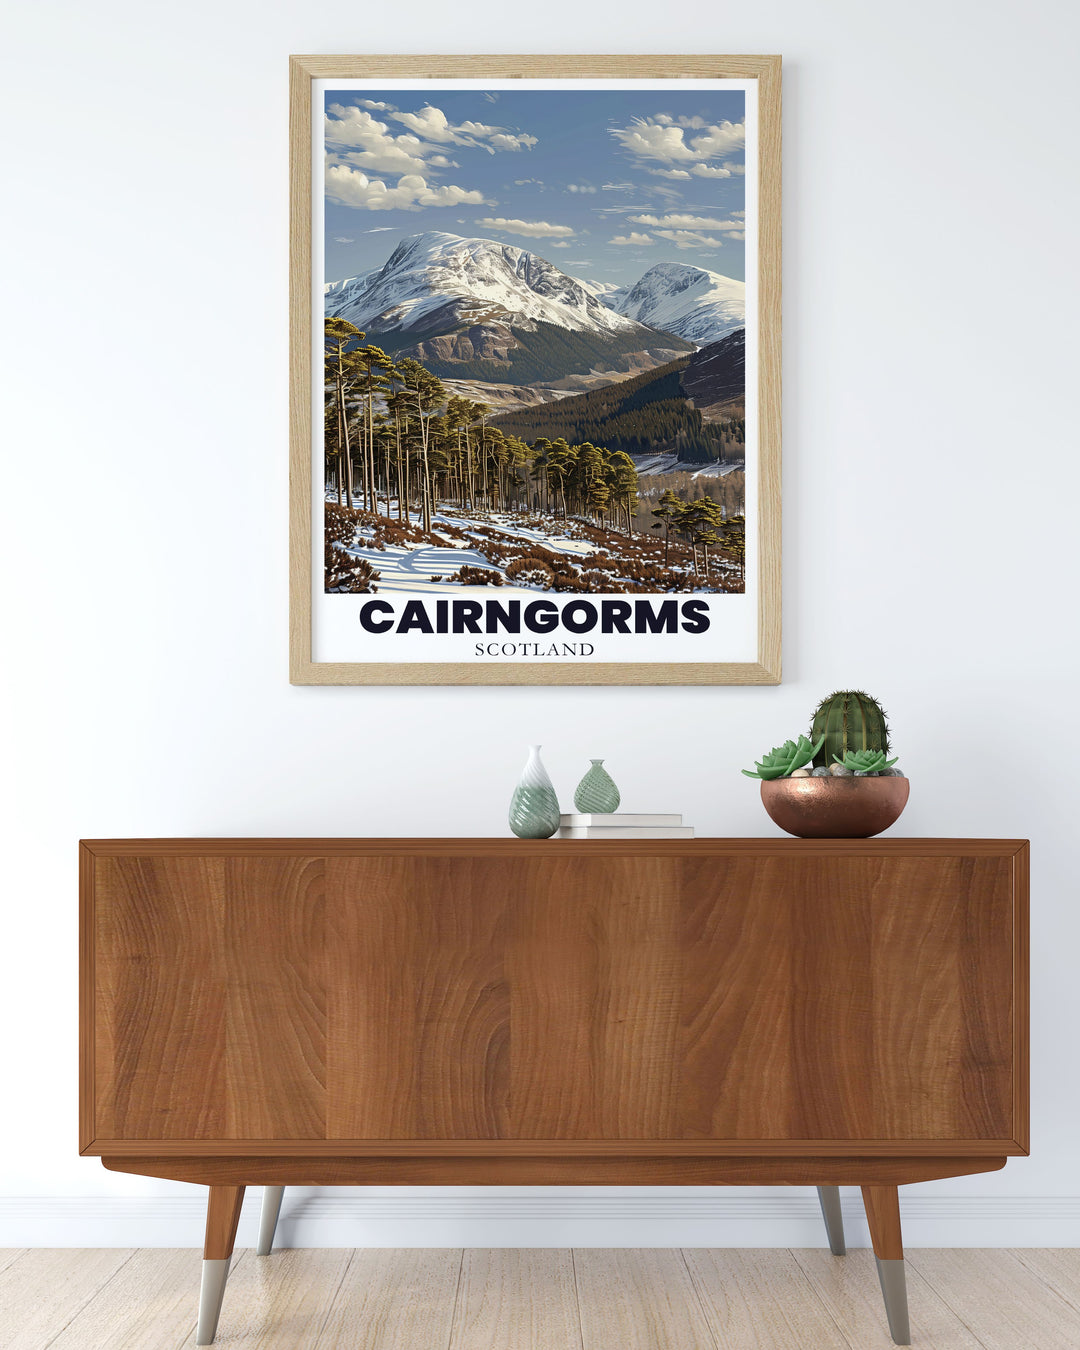 Beautiful Cairngorms mountain range wall art designed to bring the timeless appeal of Scotlands iconic mountain range into your home with intricate designs that reflect the grandeur and natural beauty of the highlands